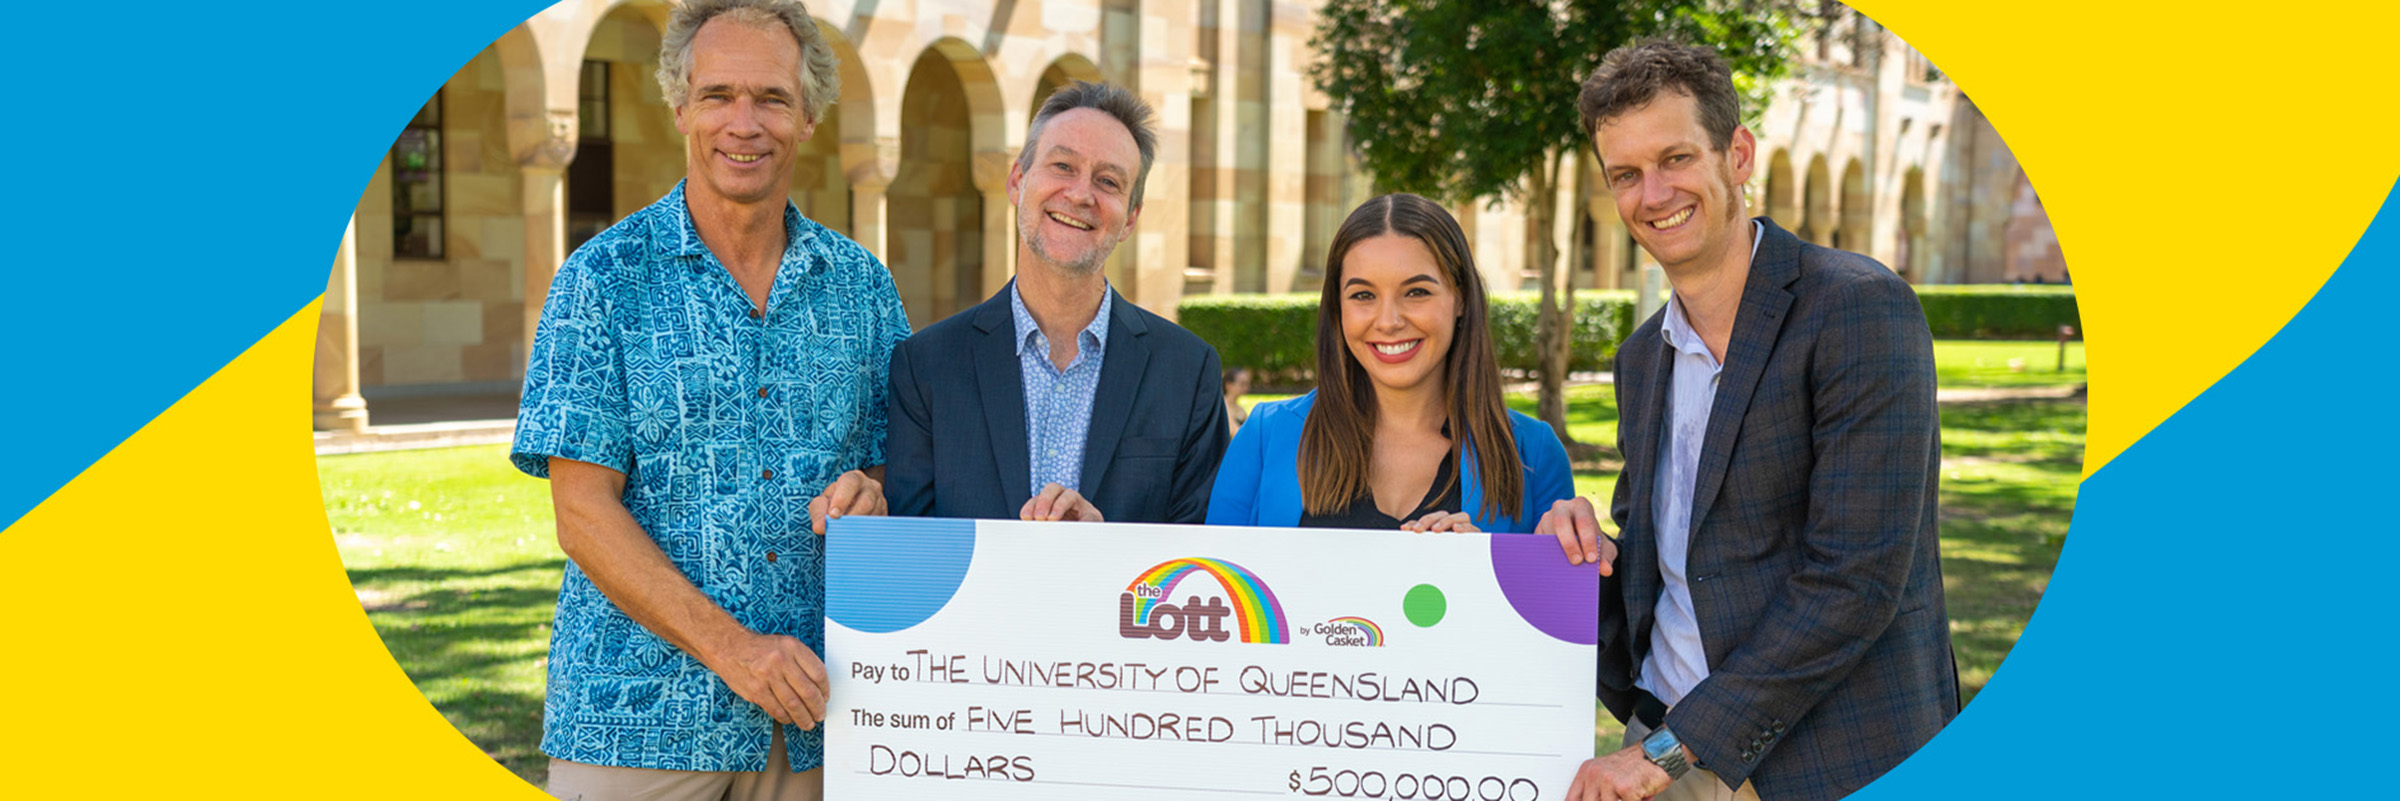 Our $500,000 boost to three world-changing UQ projects  Hero Image